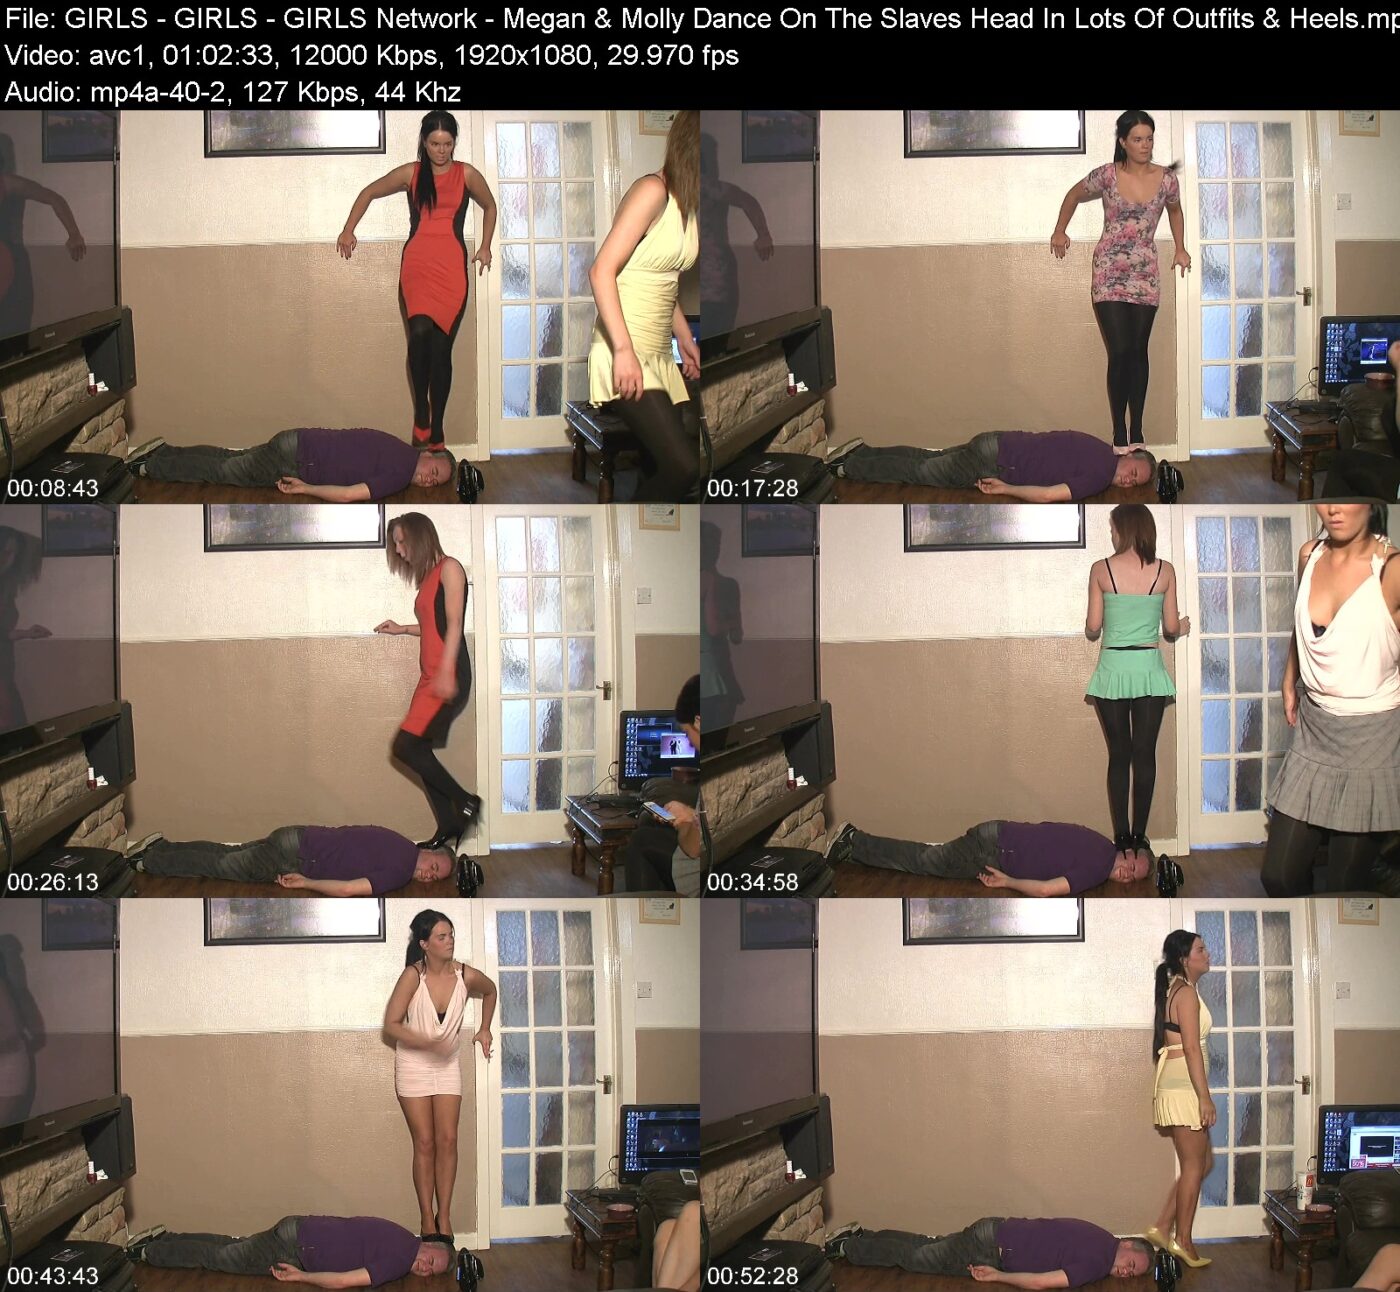 Actress: GIRLS. Title and Studio: GIRLS – GIRLS Network – Megan & Molly Dance On The Slaves Head In Lots Of Outfits & Heels